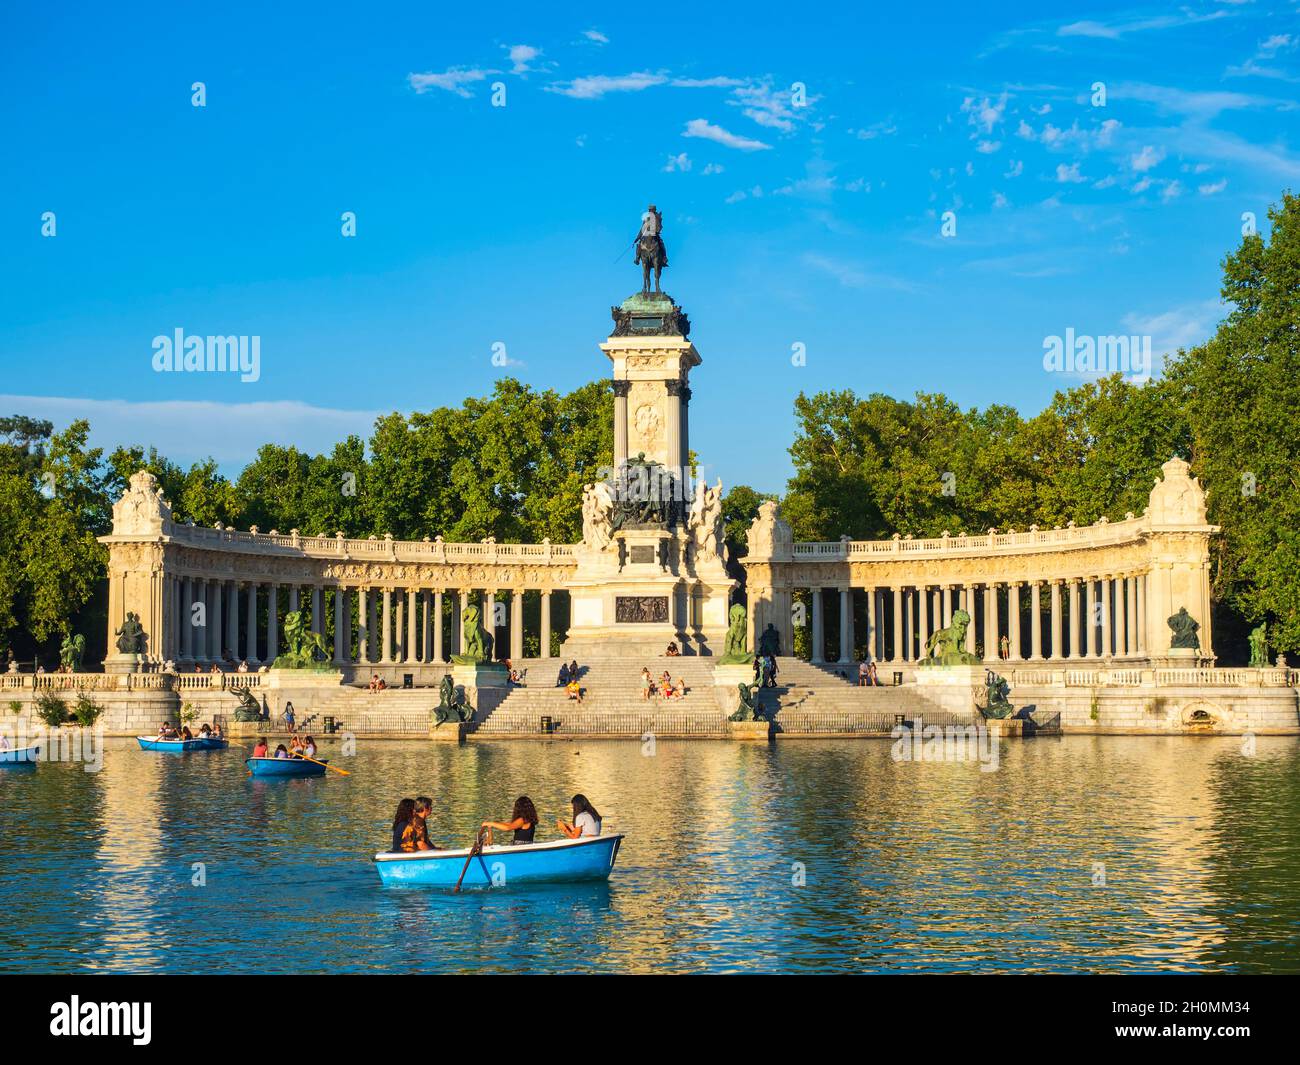 Madrid, Spain. 08/04/2021.   People of all ages have fun boating with the ducks at the pond in Madrid's Buen Retiro Park. Stock Photo